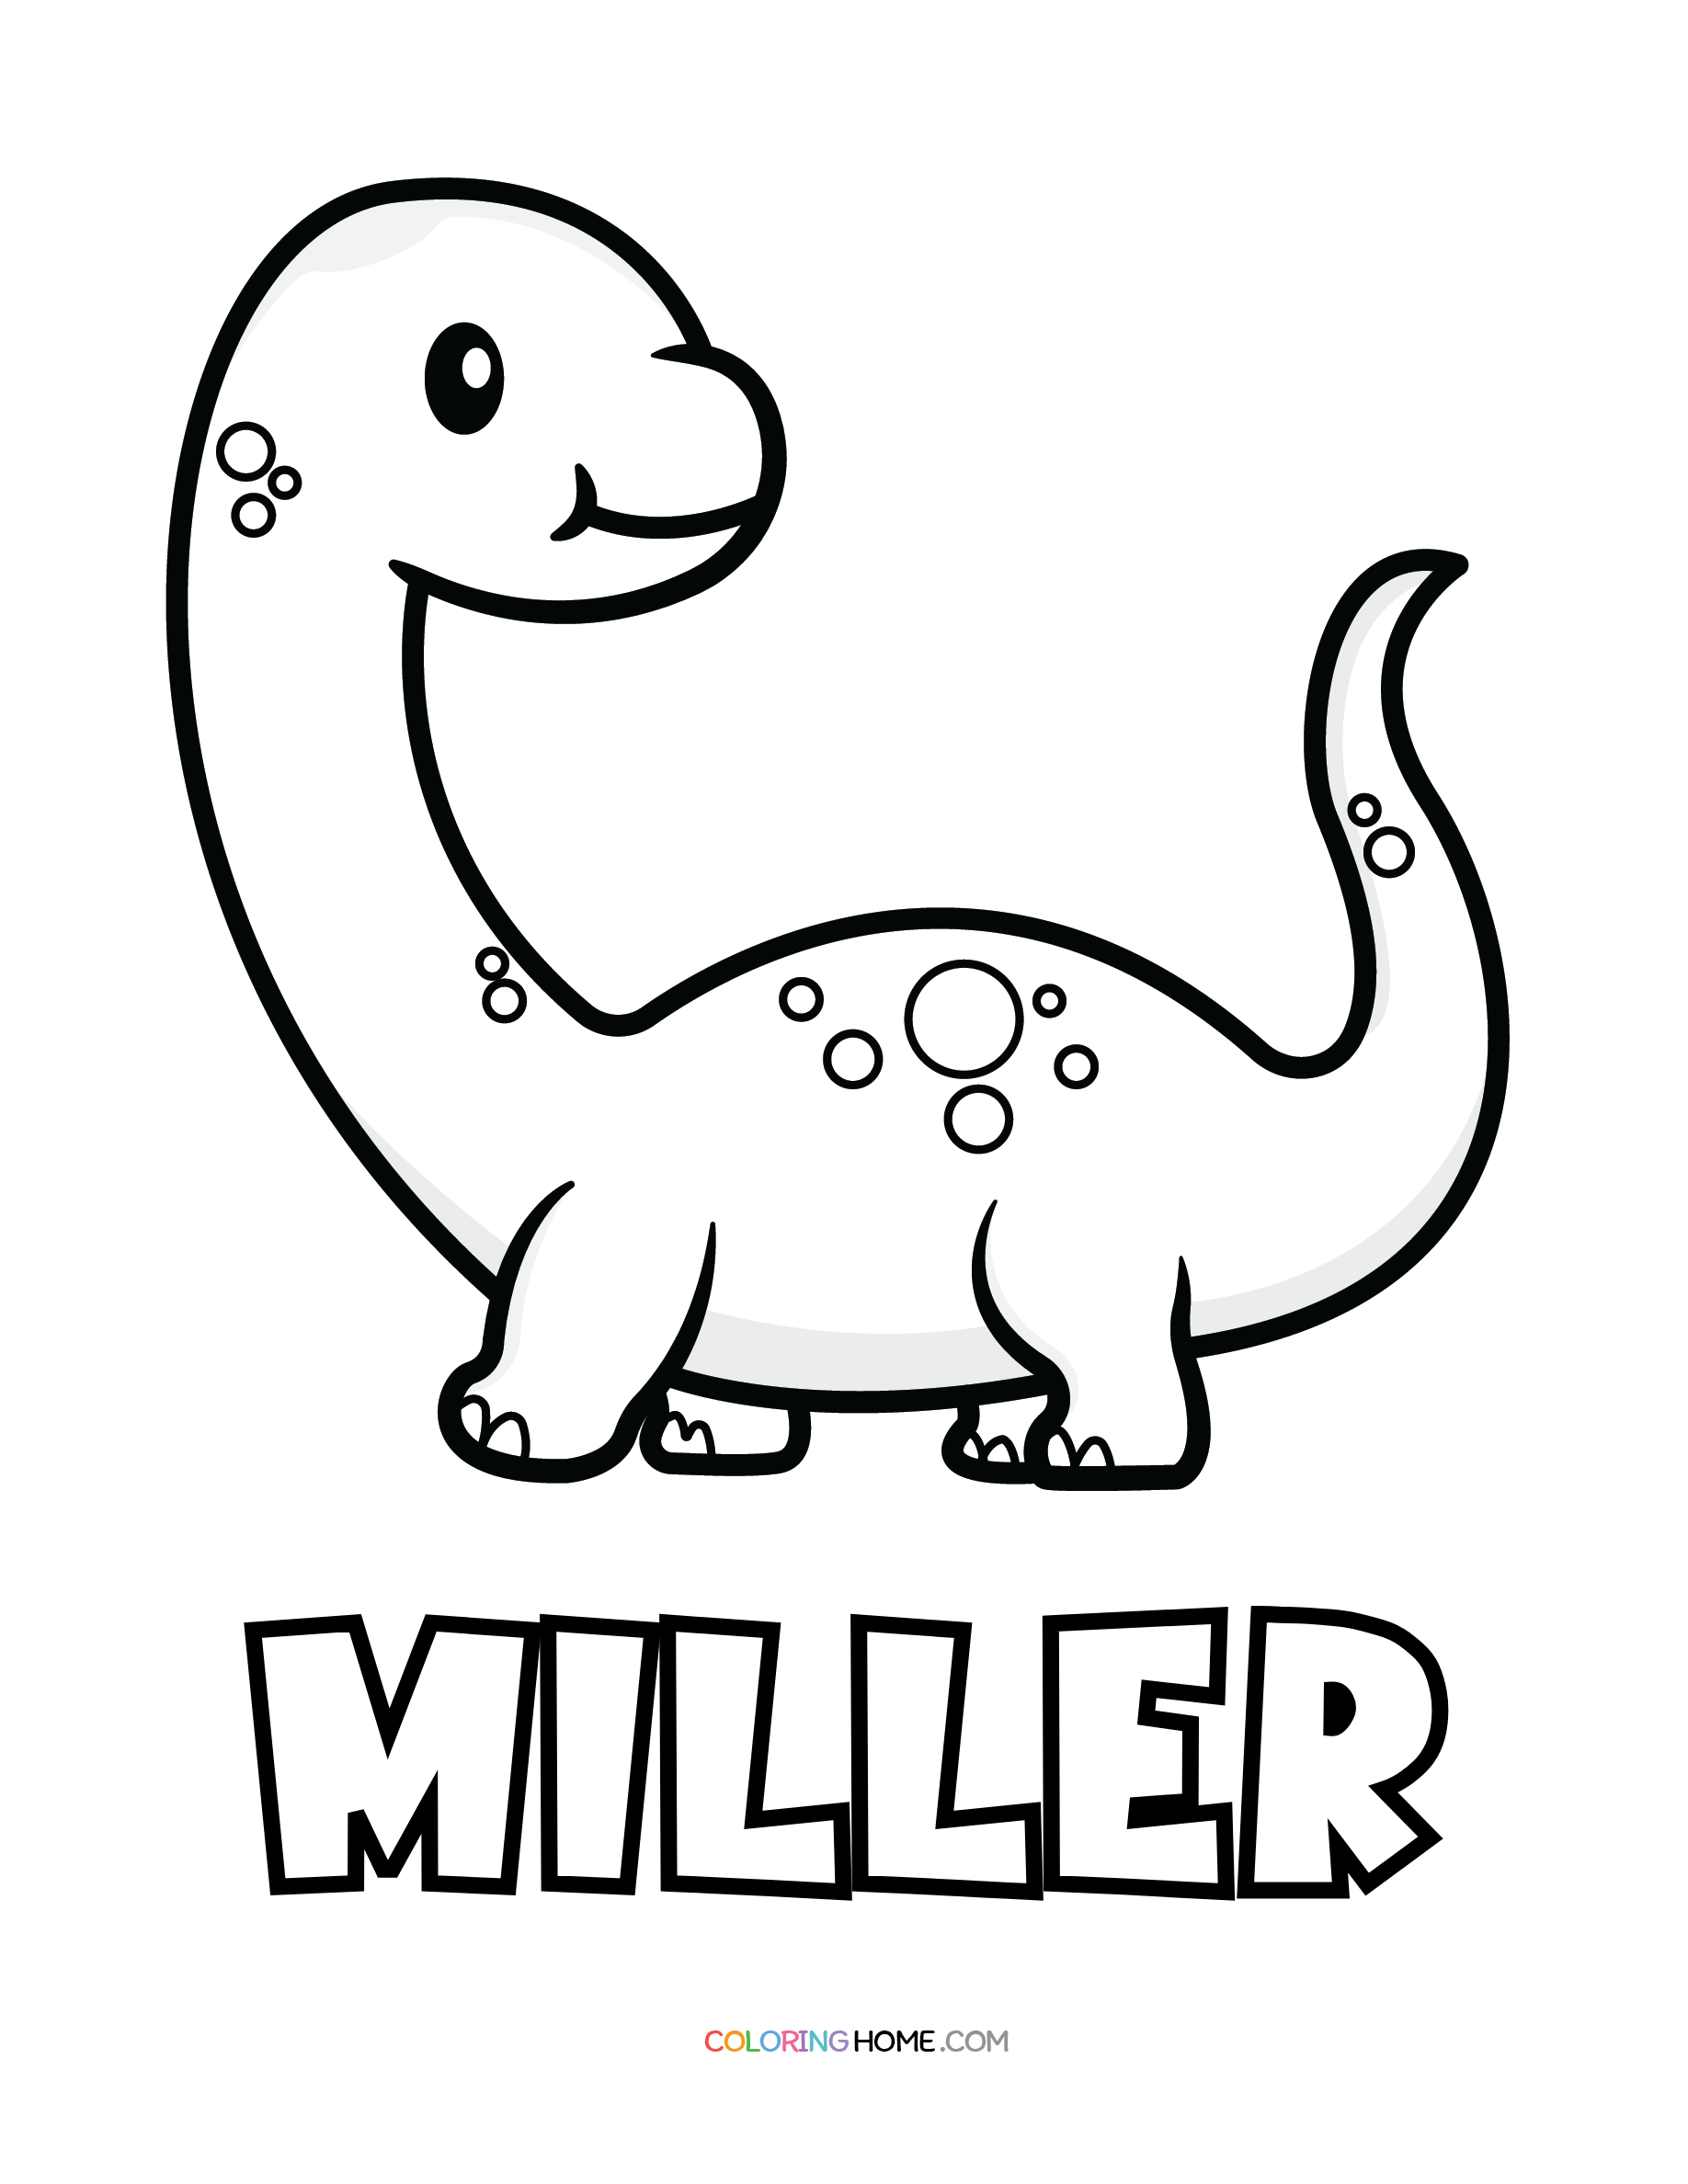 Miller dinosaur coloring page